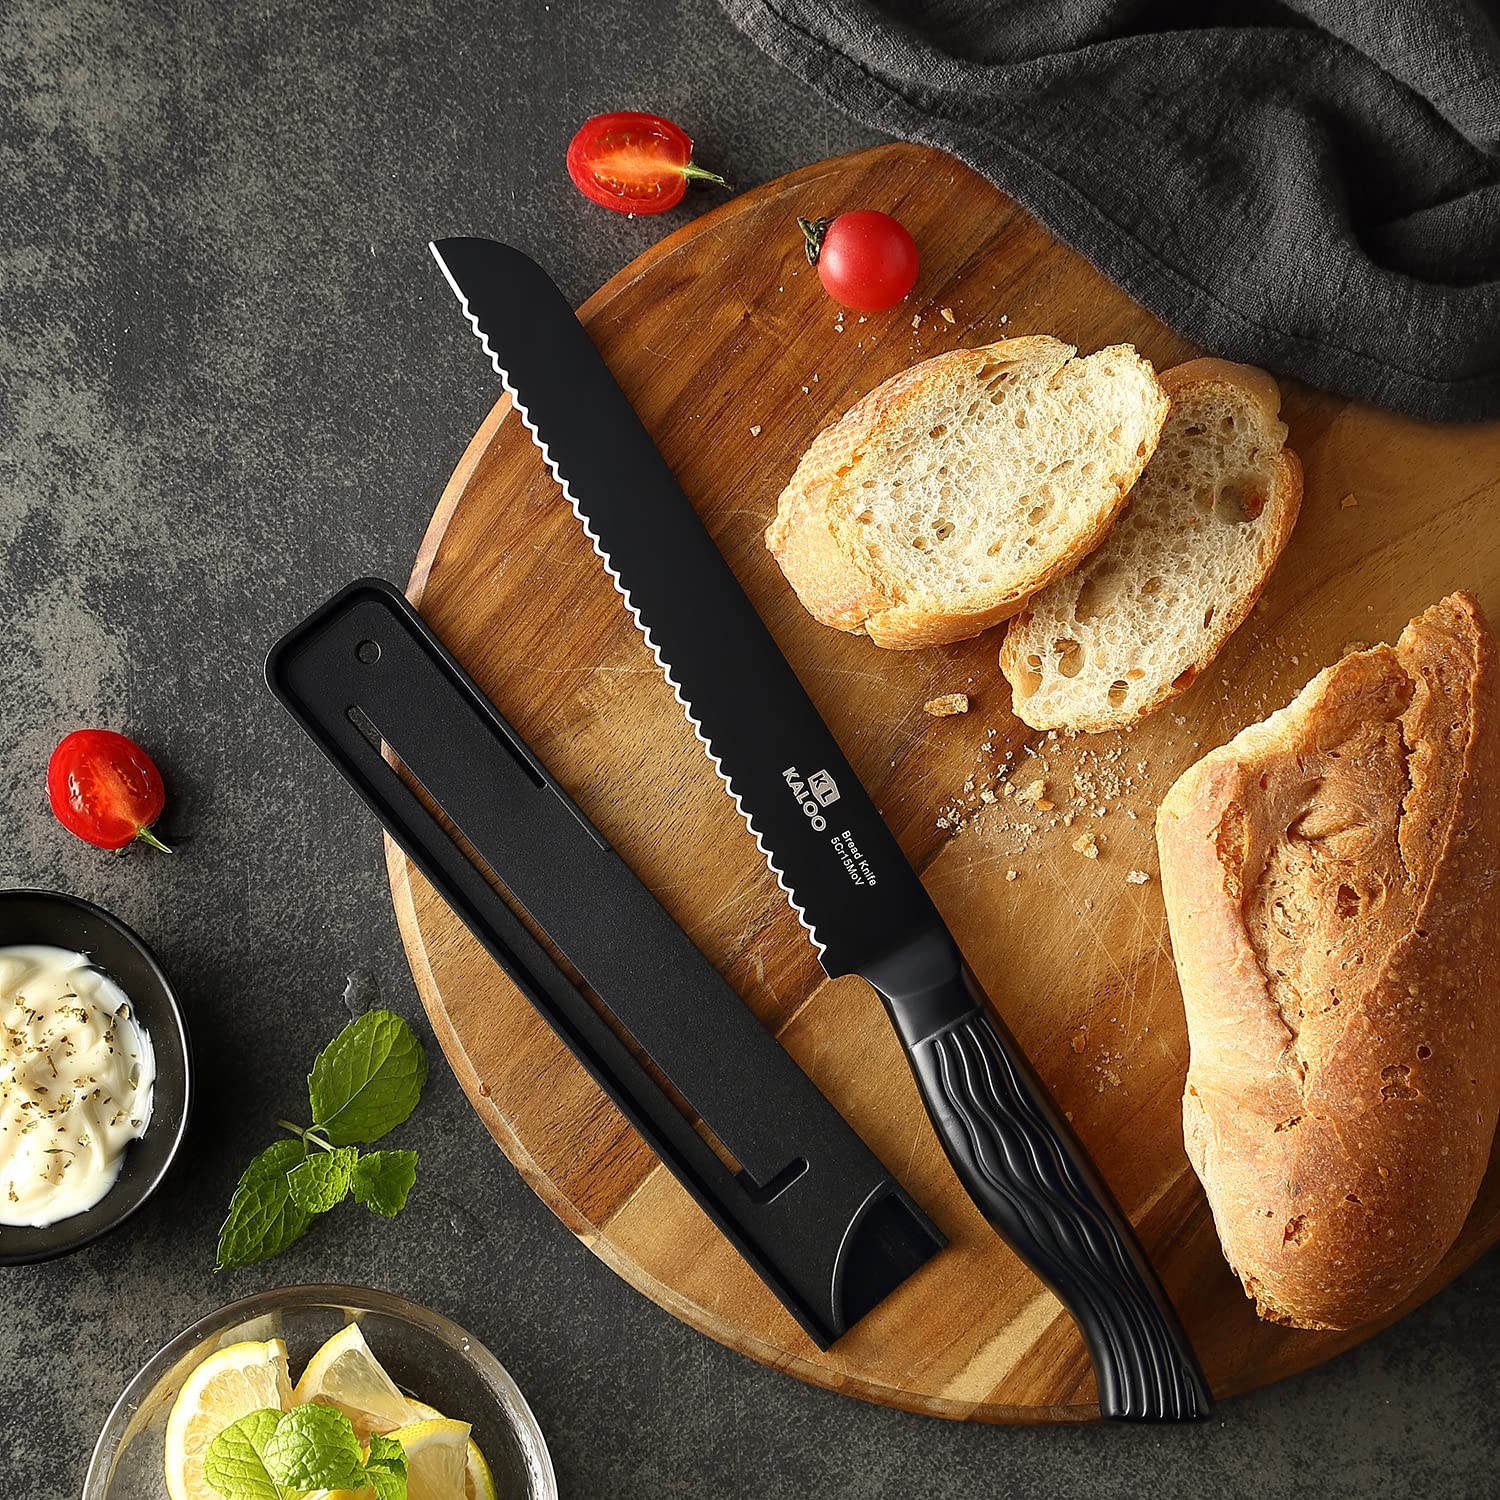 KALOO Serrated Bread Knife, Bread Knife For Homemade Bread, Professional Bread Cutter & Bread Slicers, Ultra Sharp German Stainless Steel, Full Tang With Sheath (8-Inch Blade With 5-inch Handle)